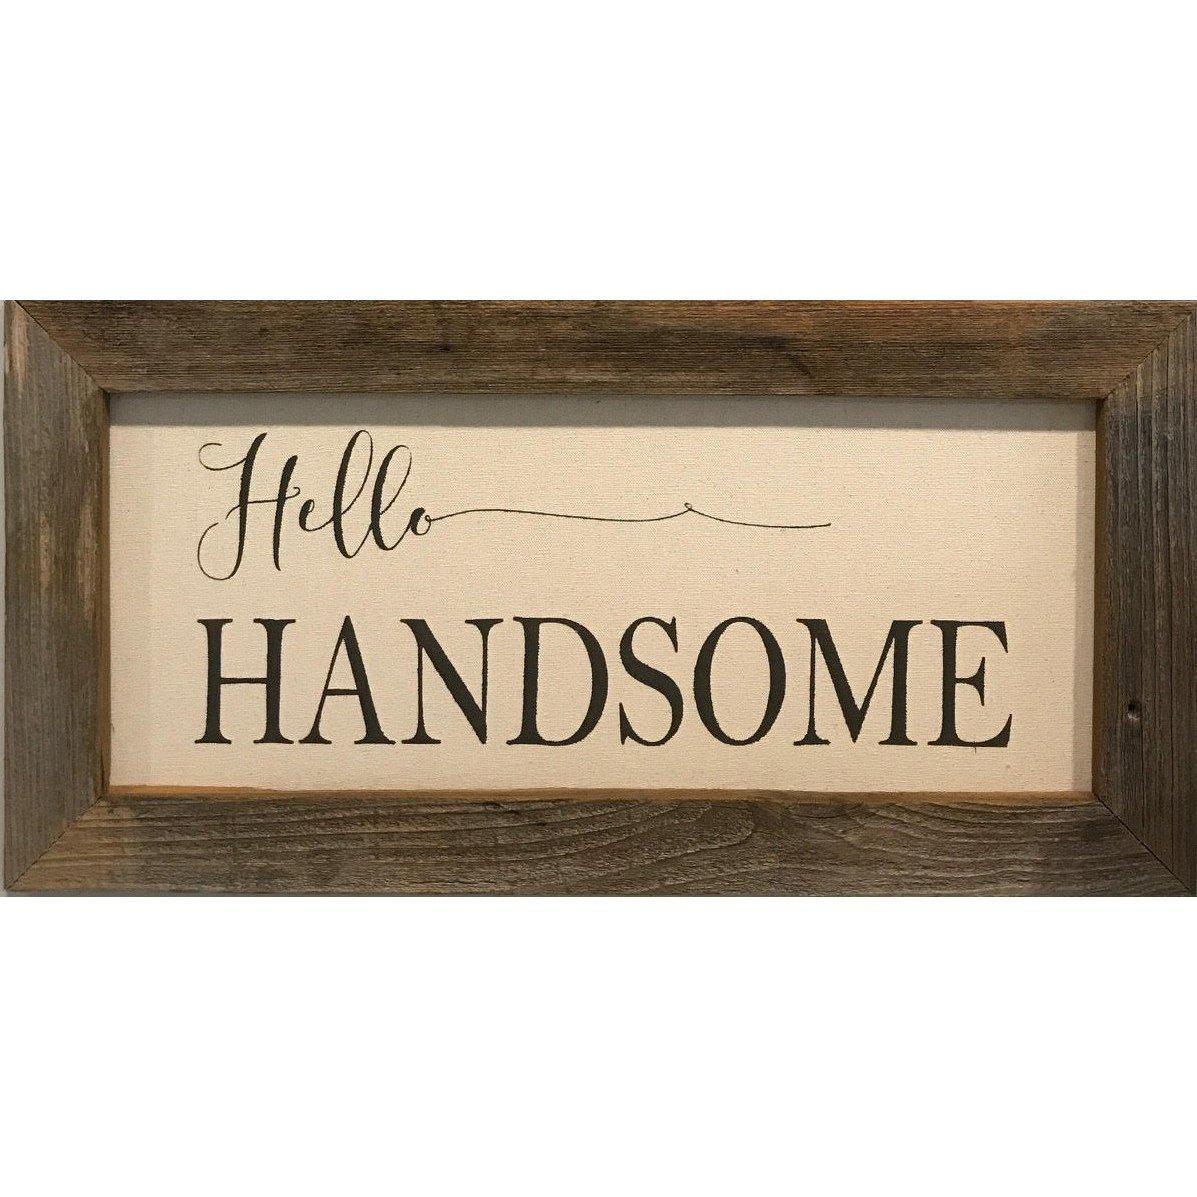 Hello Handsome Reclaimed Wood Framed Canvas Print